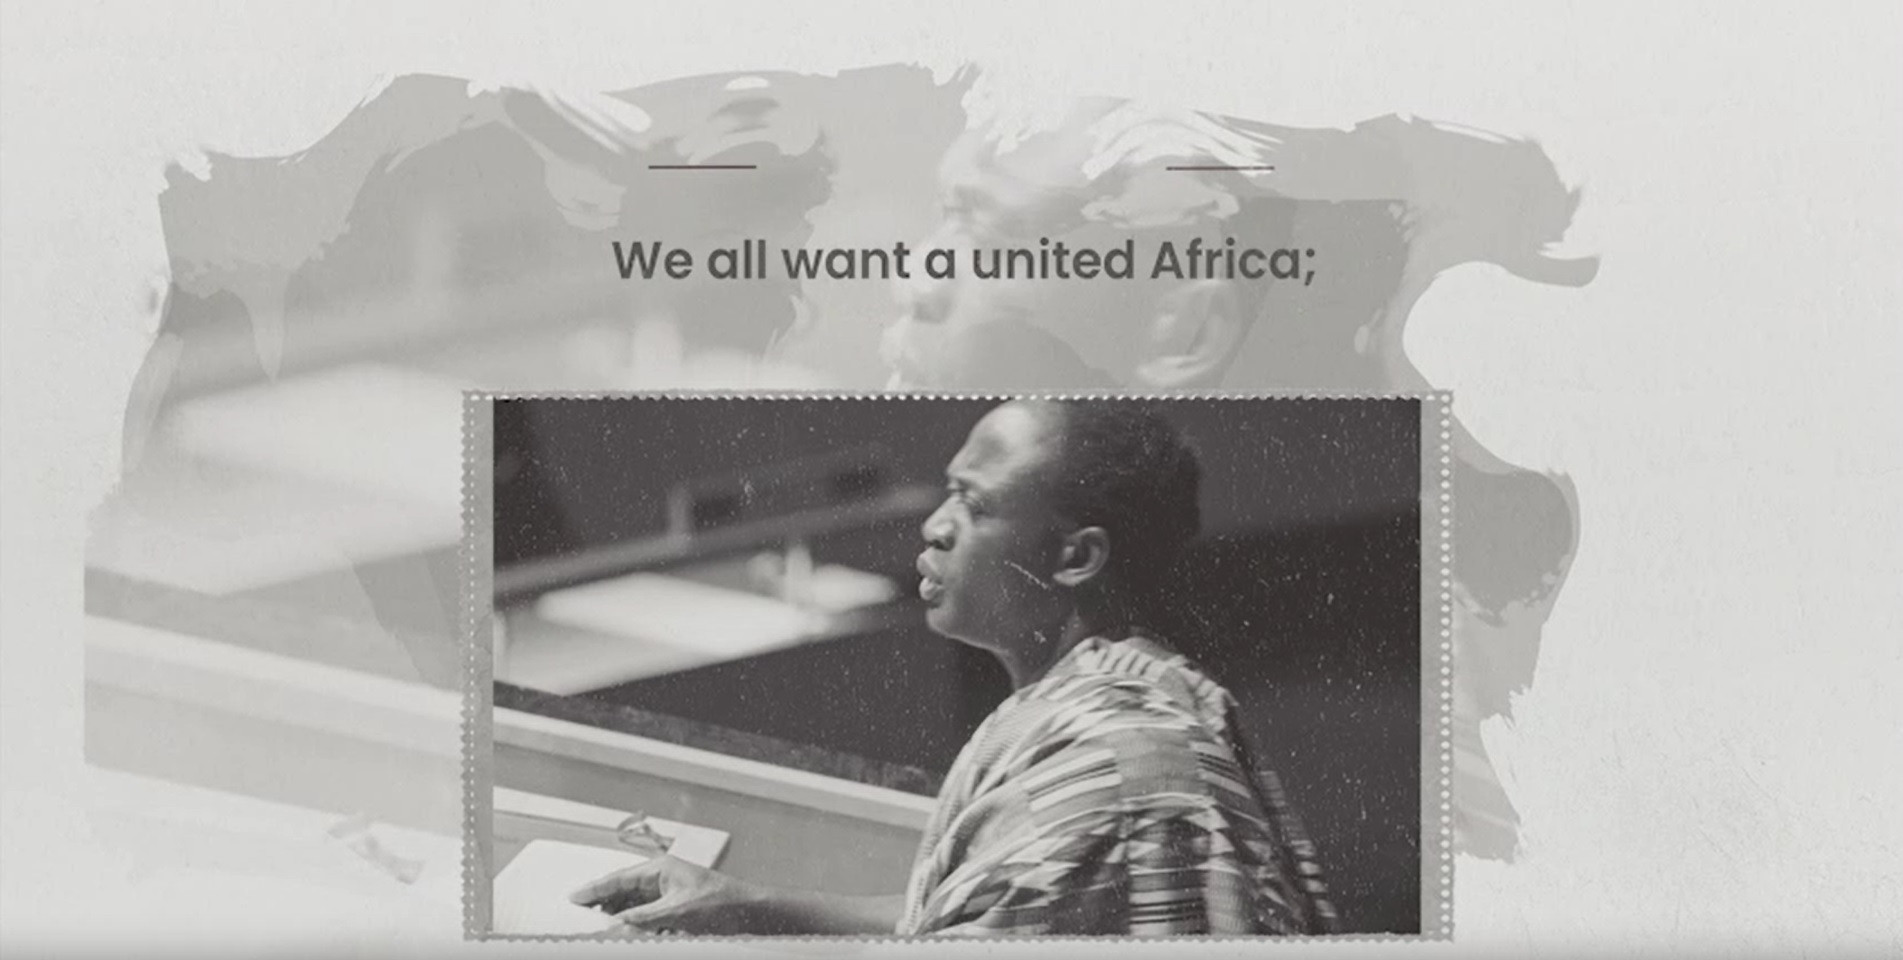 The promotional video begins with a speech from former Ghanaian President Kwame Nkrumah promoting African unity ©Accra 2023